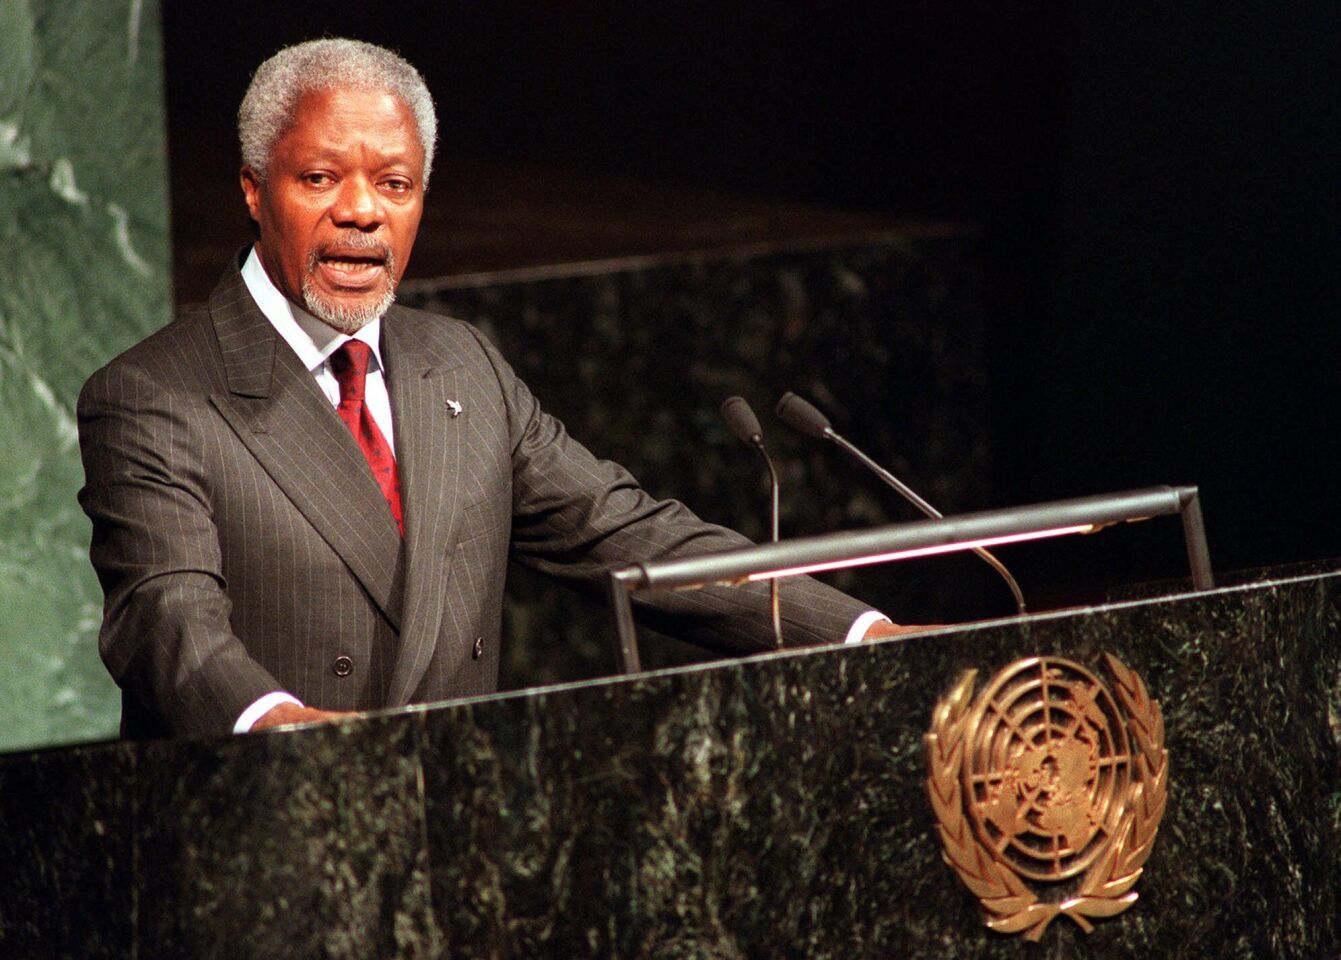 Former U.N. Secretary-General Kofi Annan was one of the world's most celebrated diplomats, despite presiding over some of the worst failures and scandals at the world body. He served two terms, from Jan. 1, 1997, to Dec. 31, 2006, and was awarded the Nobel Peace Prize jointly with the U.N. in 2001. He was 80.